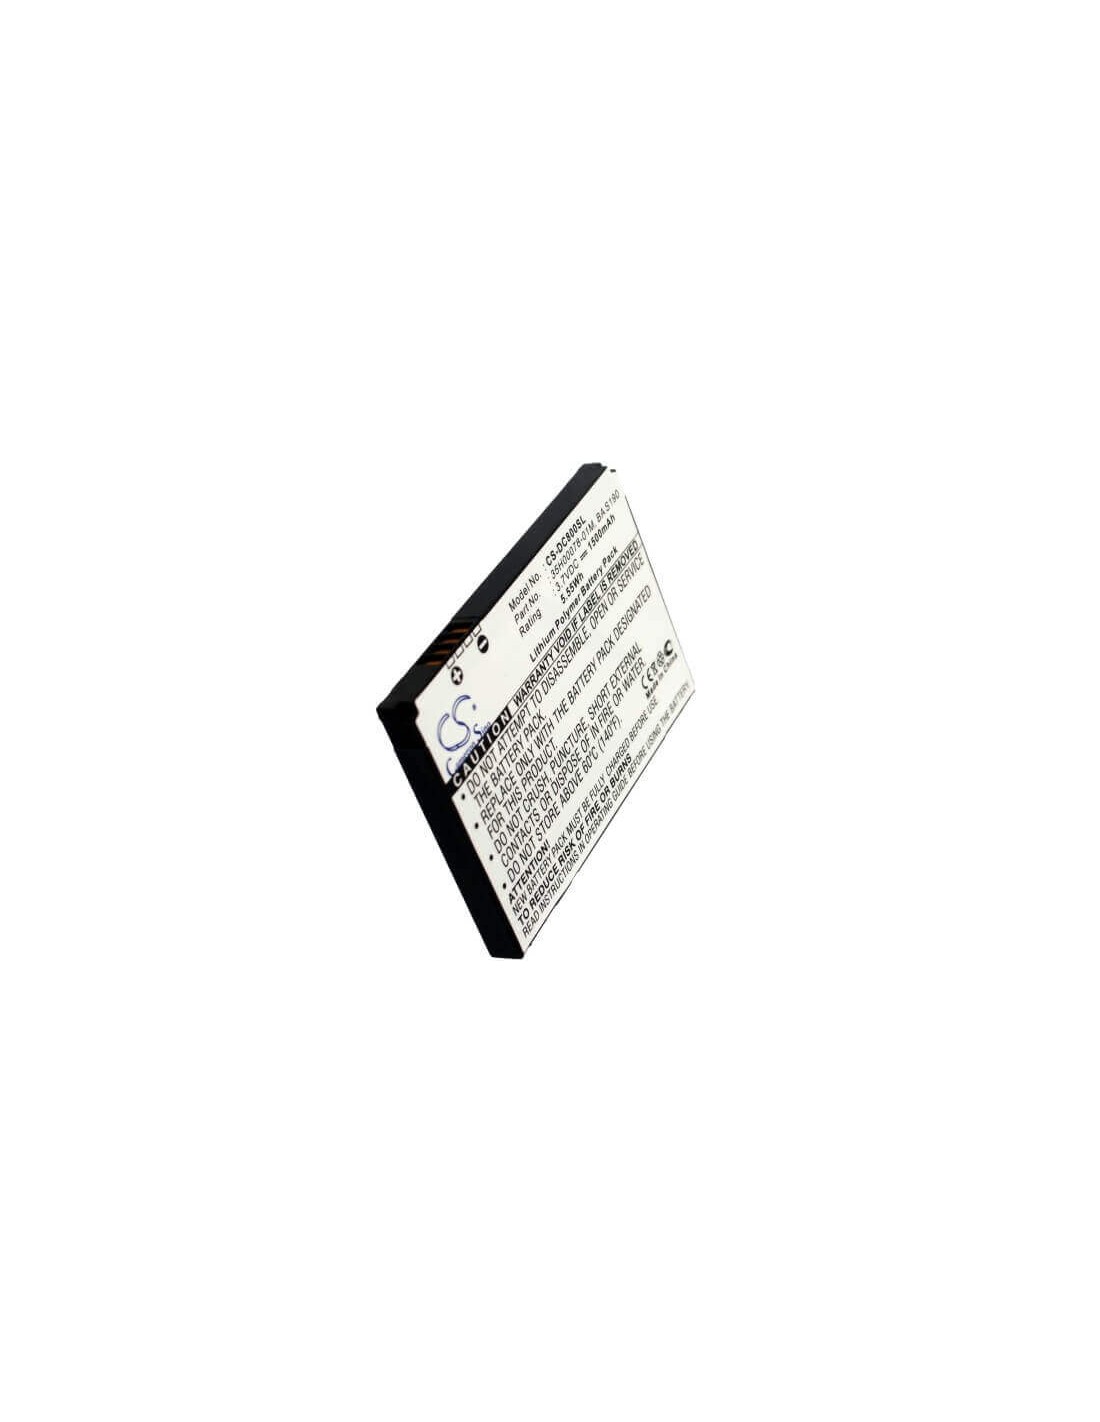 Battery for HTC P4350, P4351, Herald 100 3.7V, 1500mAh - 5.55Wh